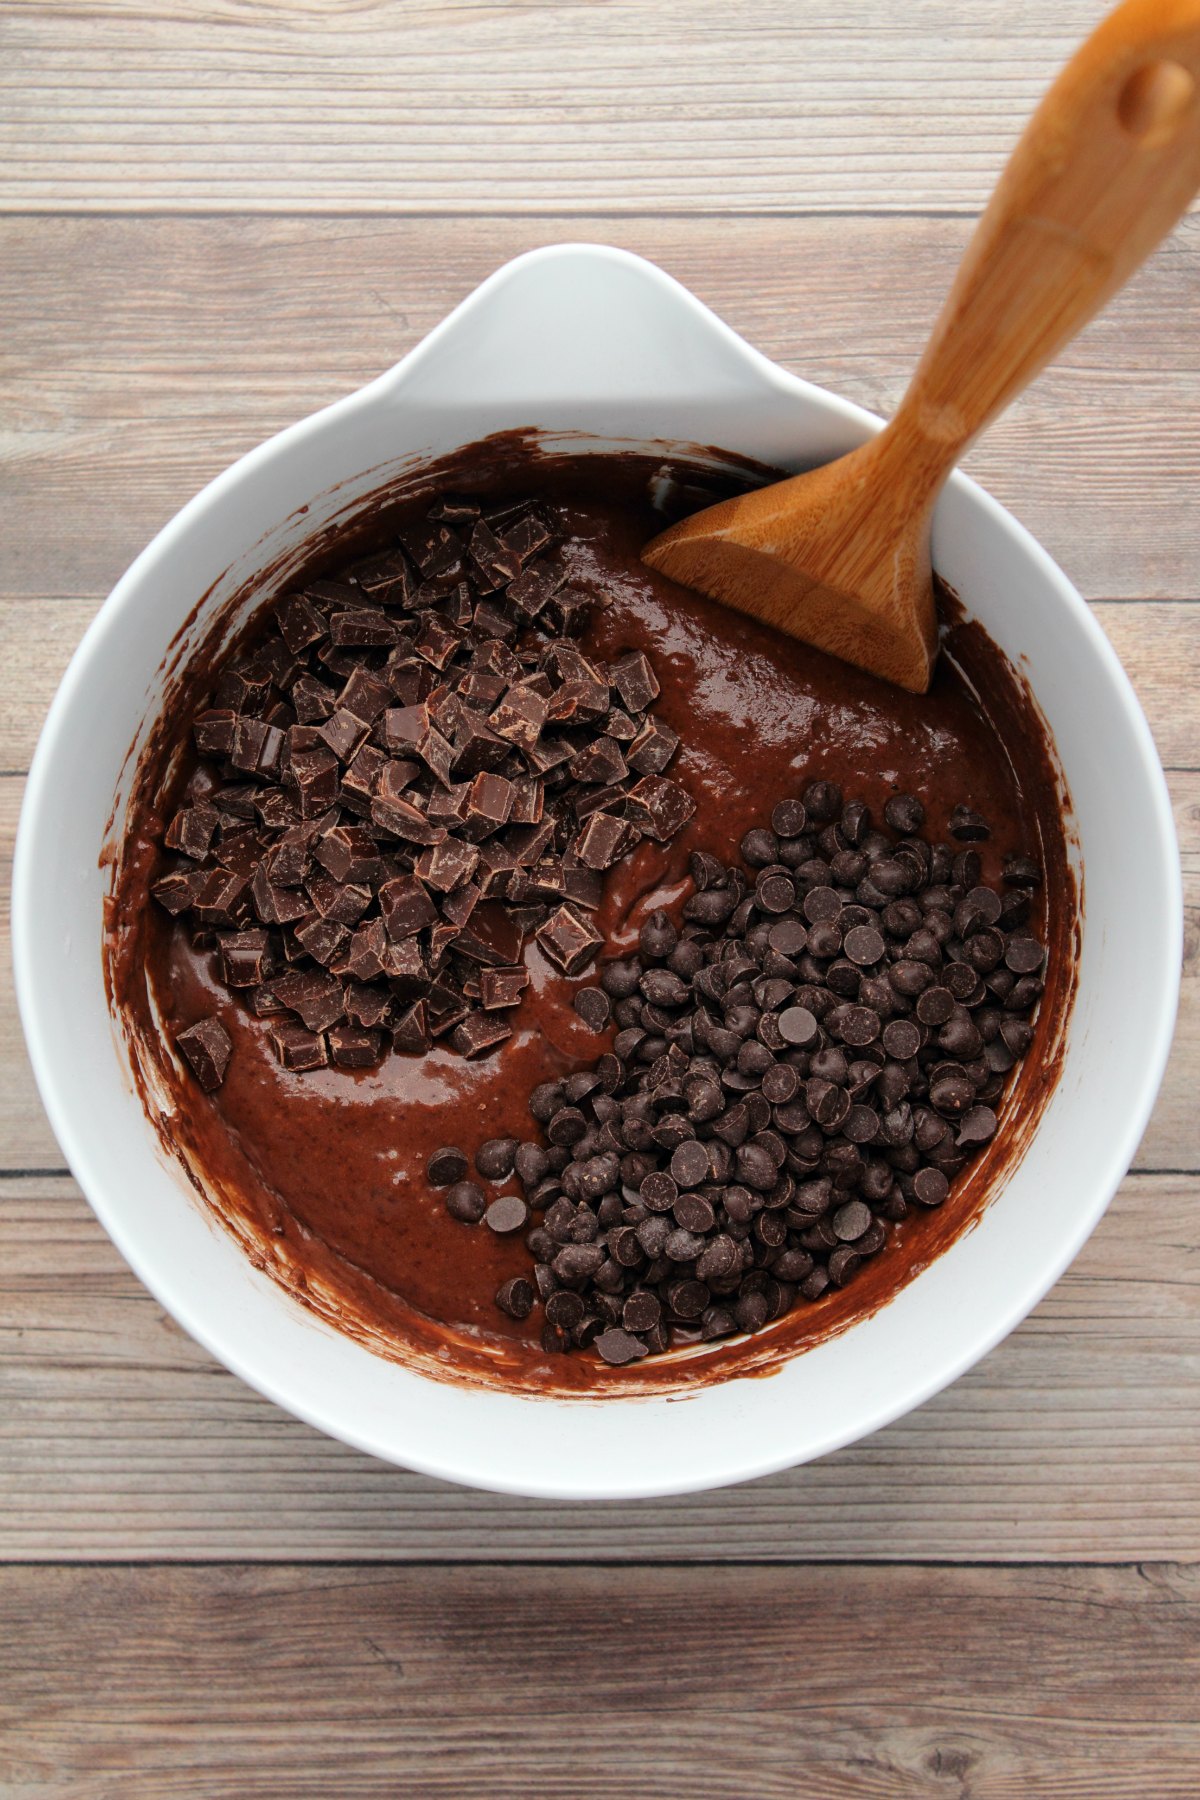 Chocolate chips and chocolate chunks added to mixing bowl.